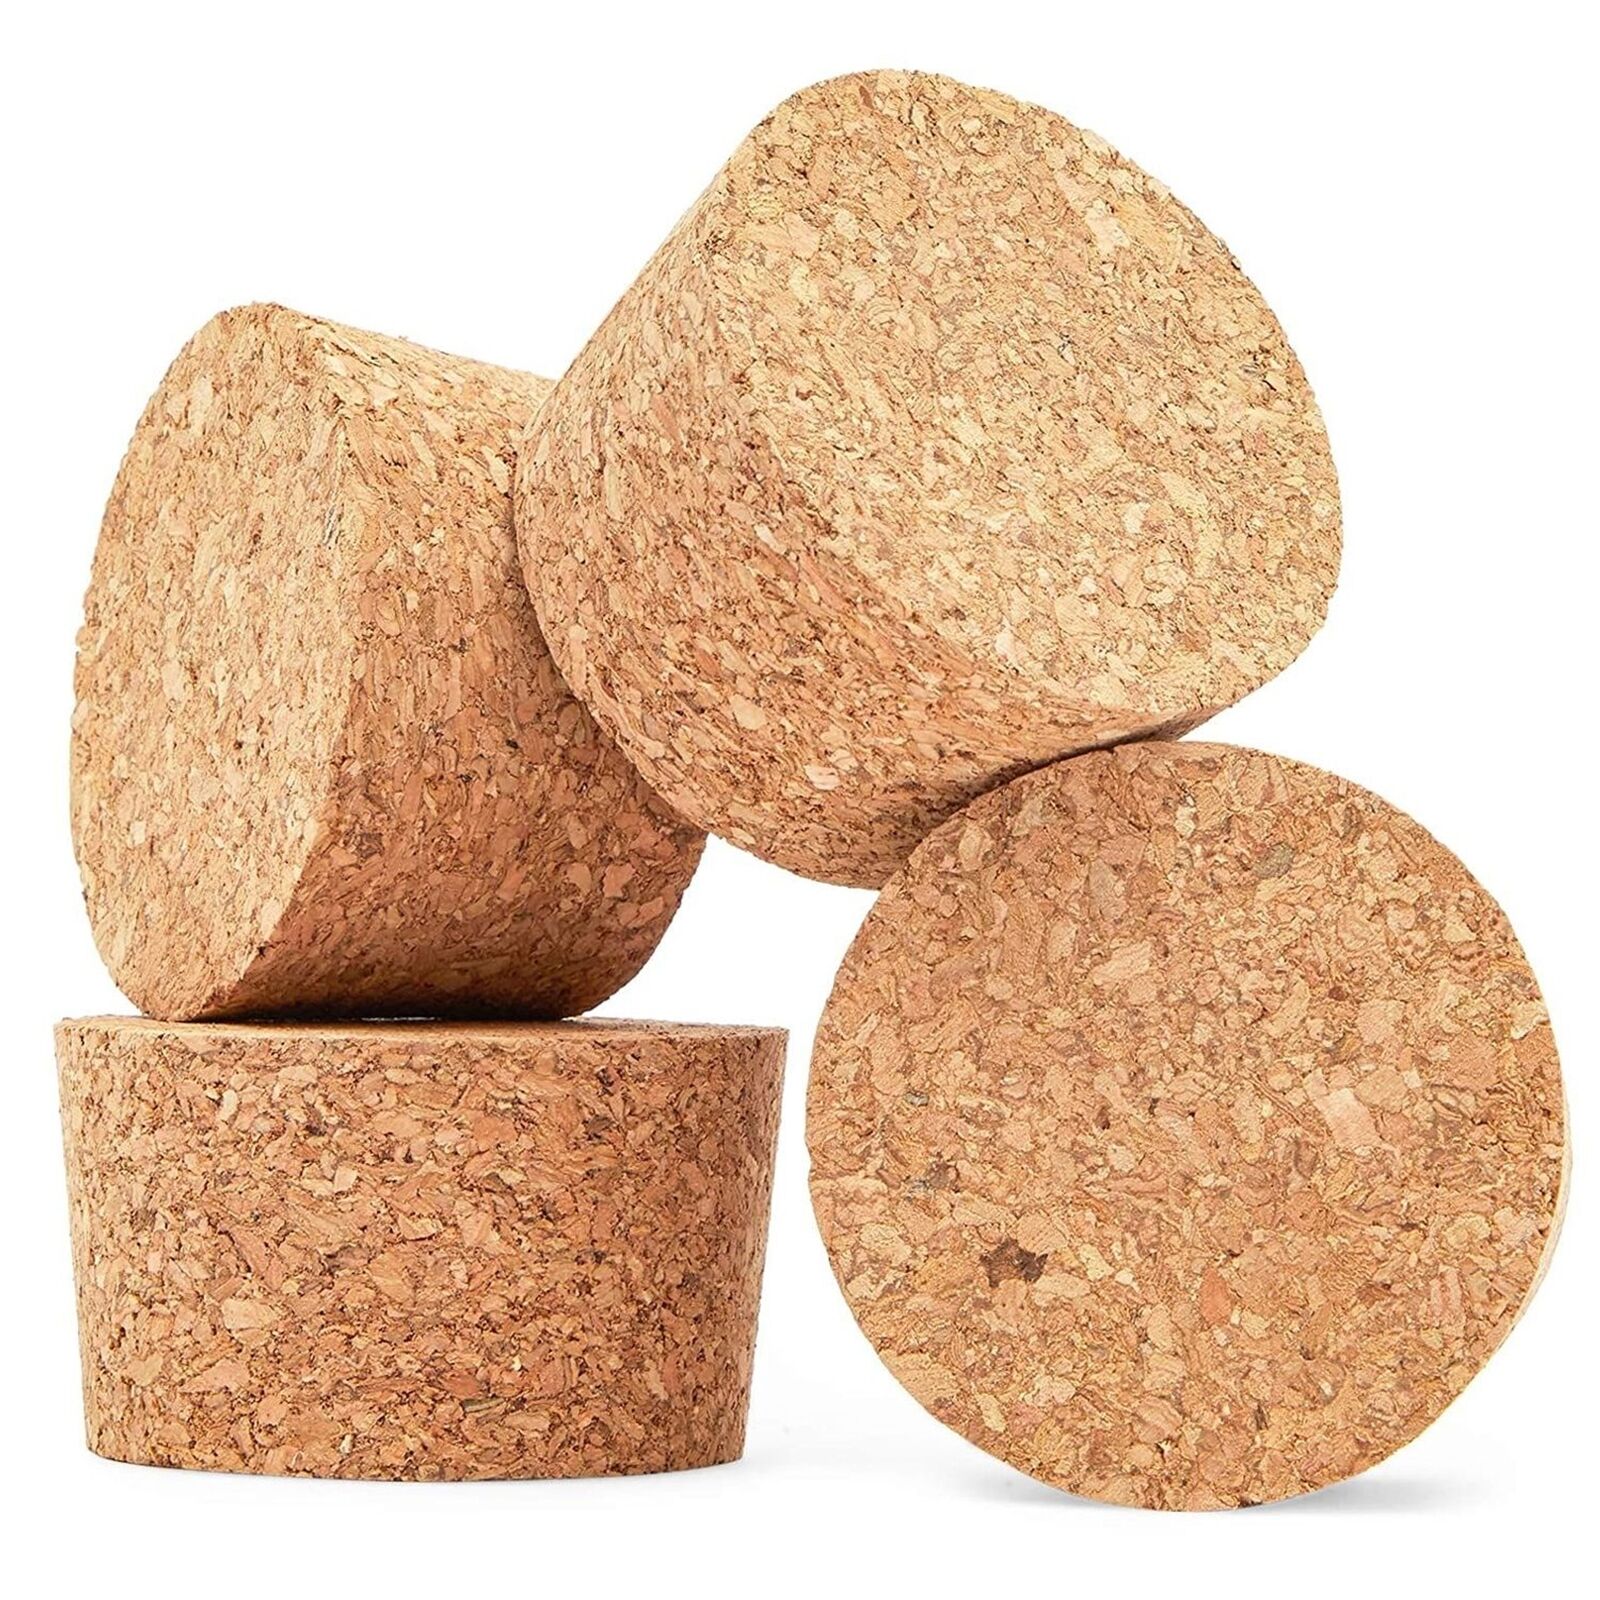 4-Pack Large Cork Stoppers, Cork Lids Suitable for Mason Jars, Small Carafes